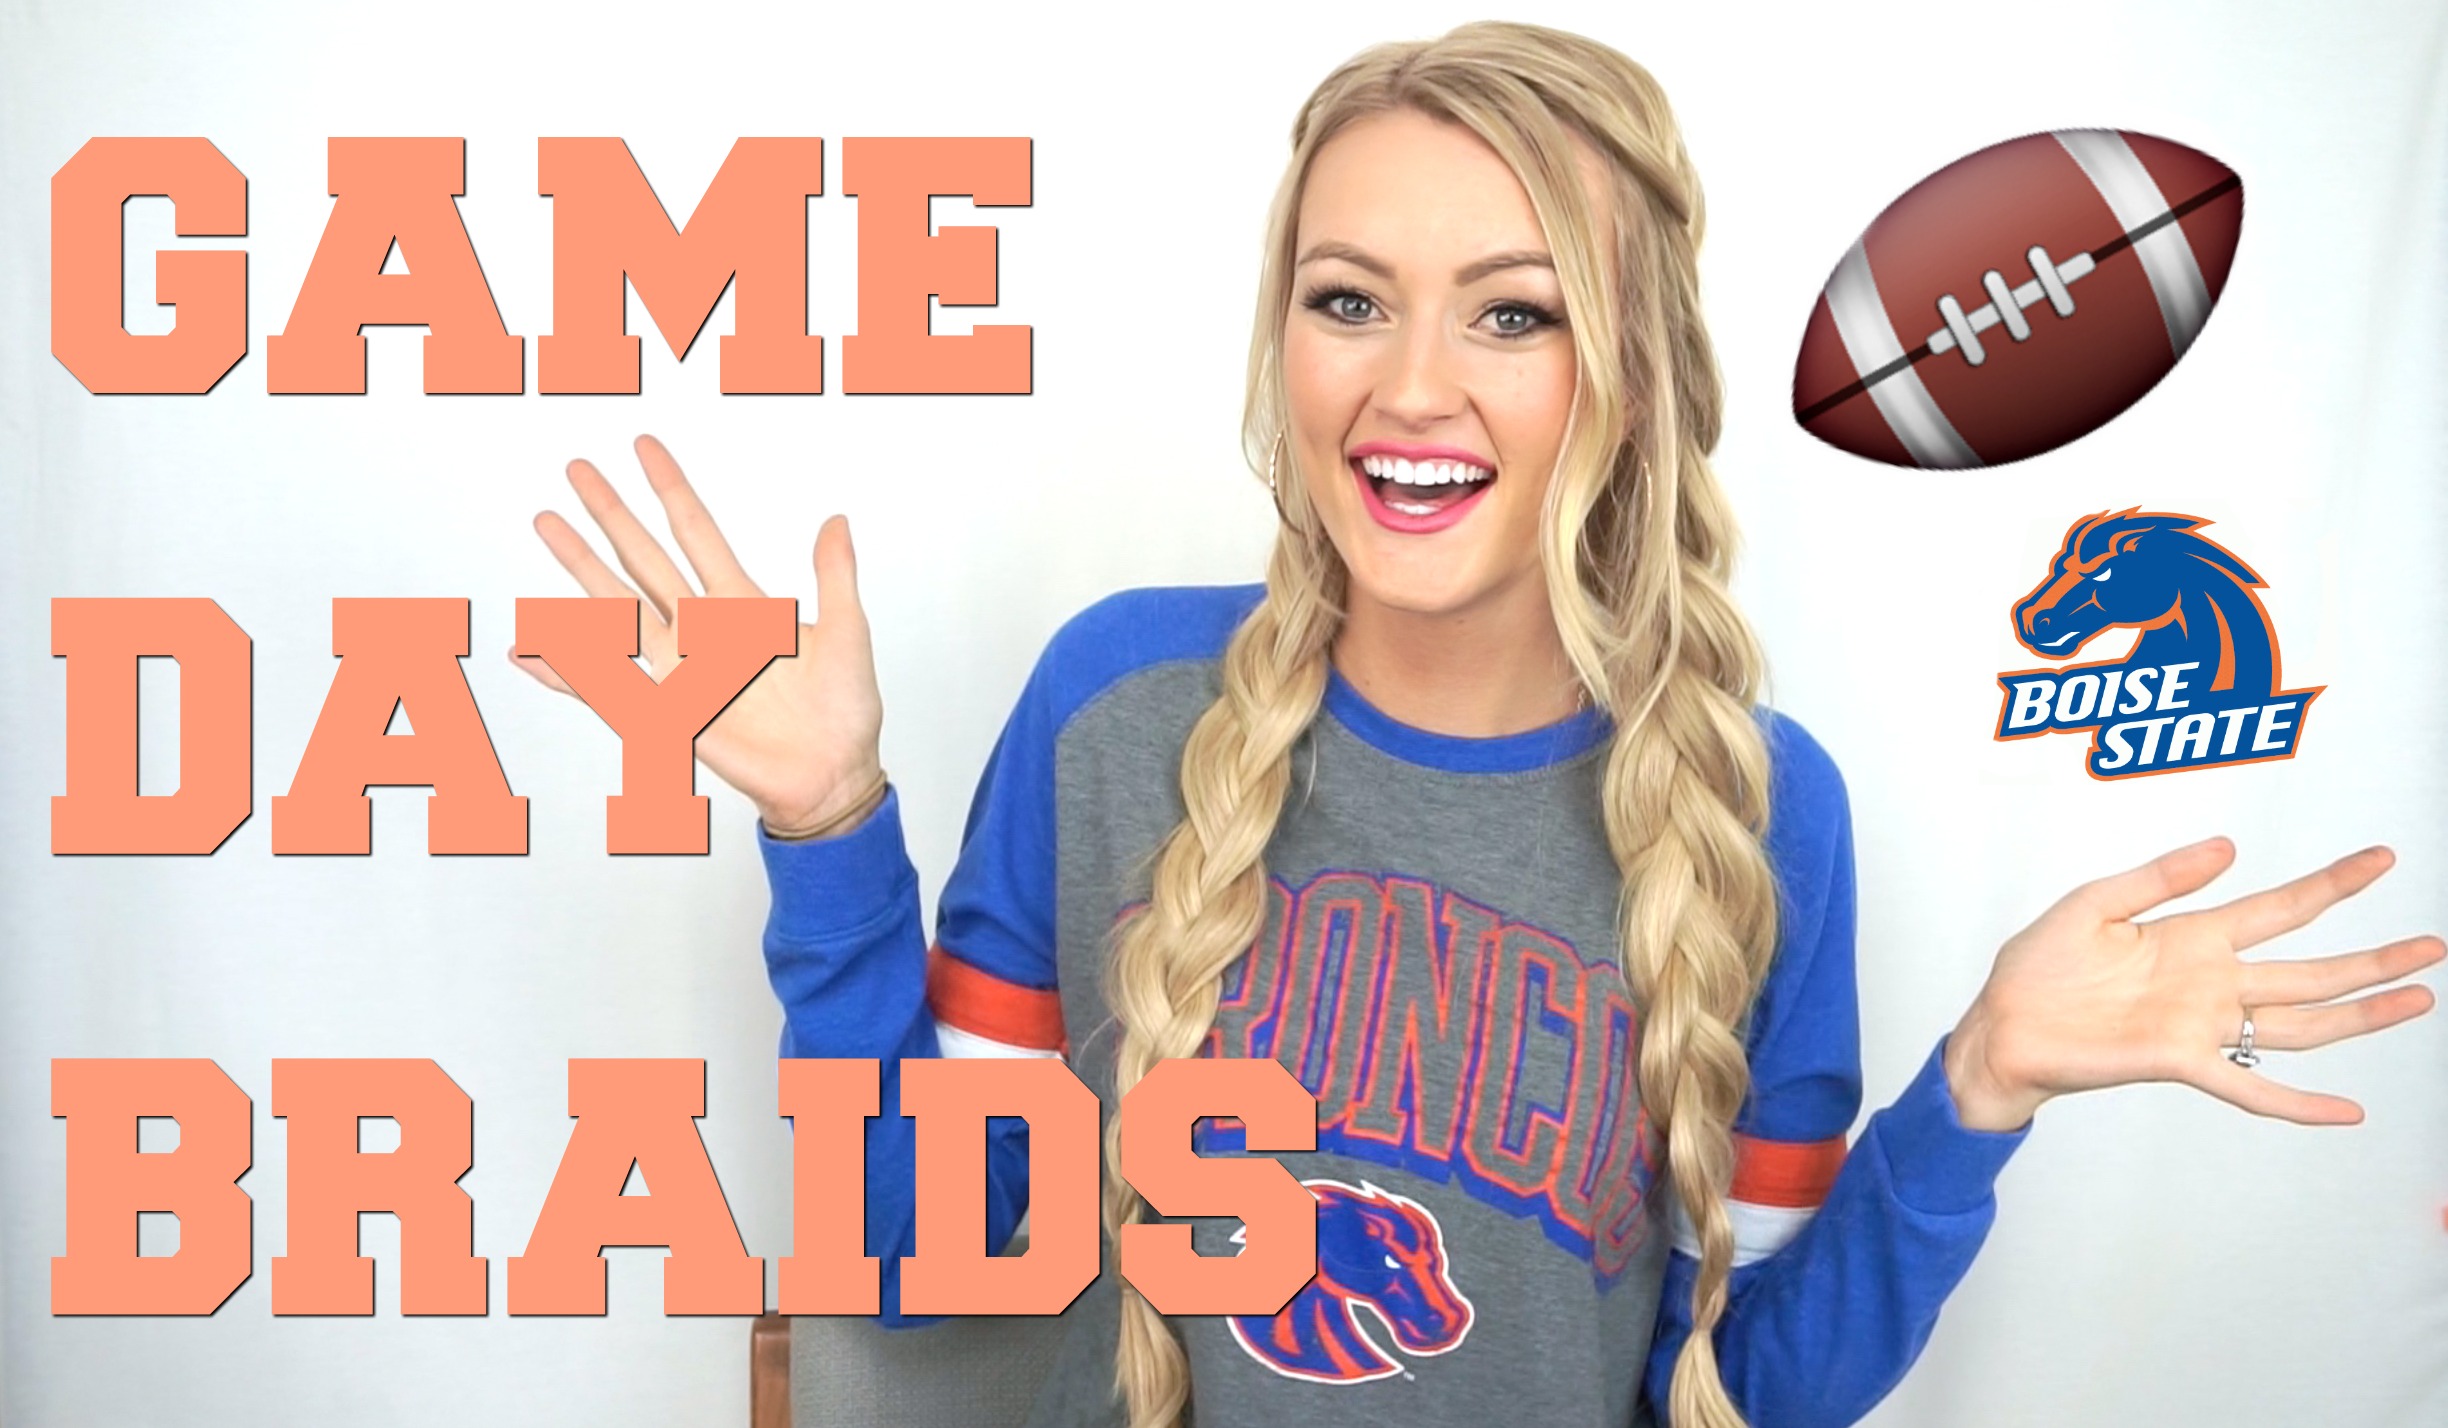 VIDEO: Game Day Hairstyle